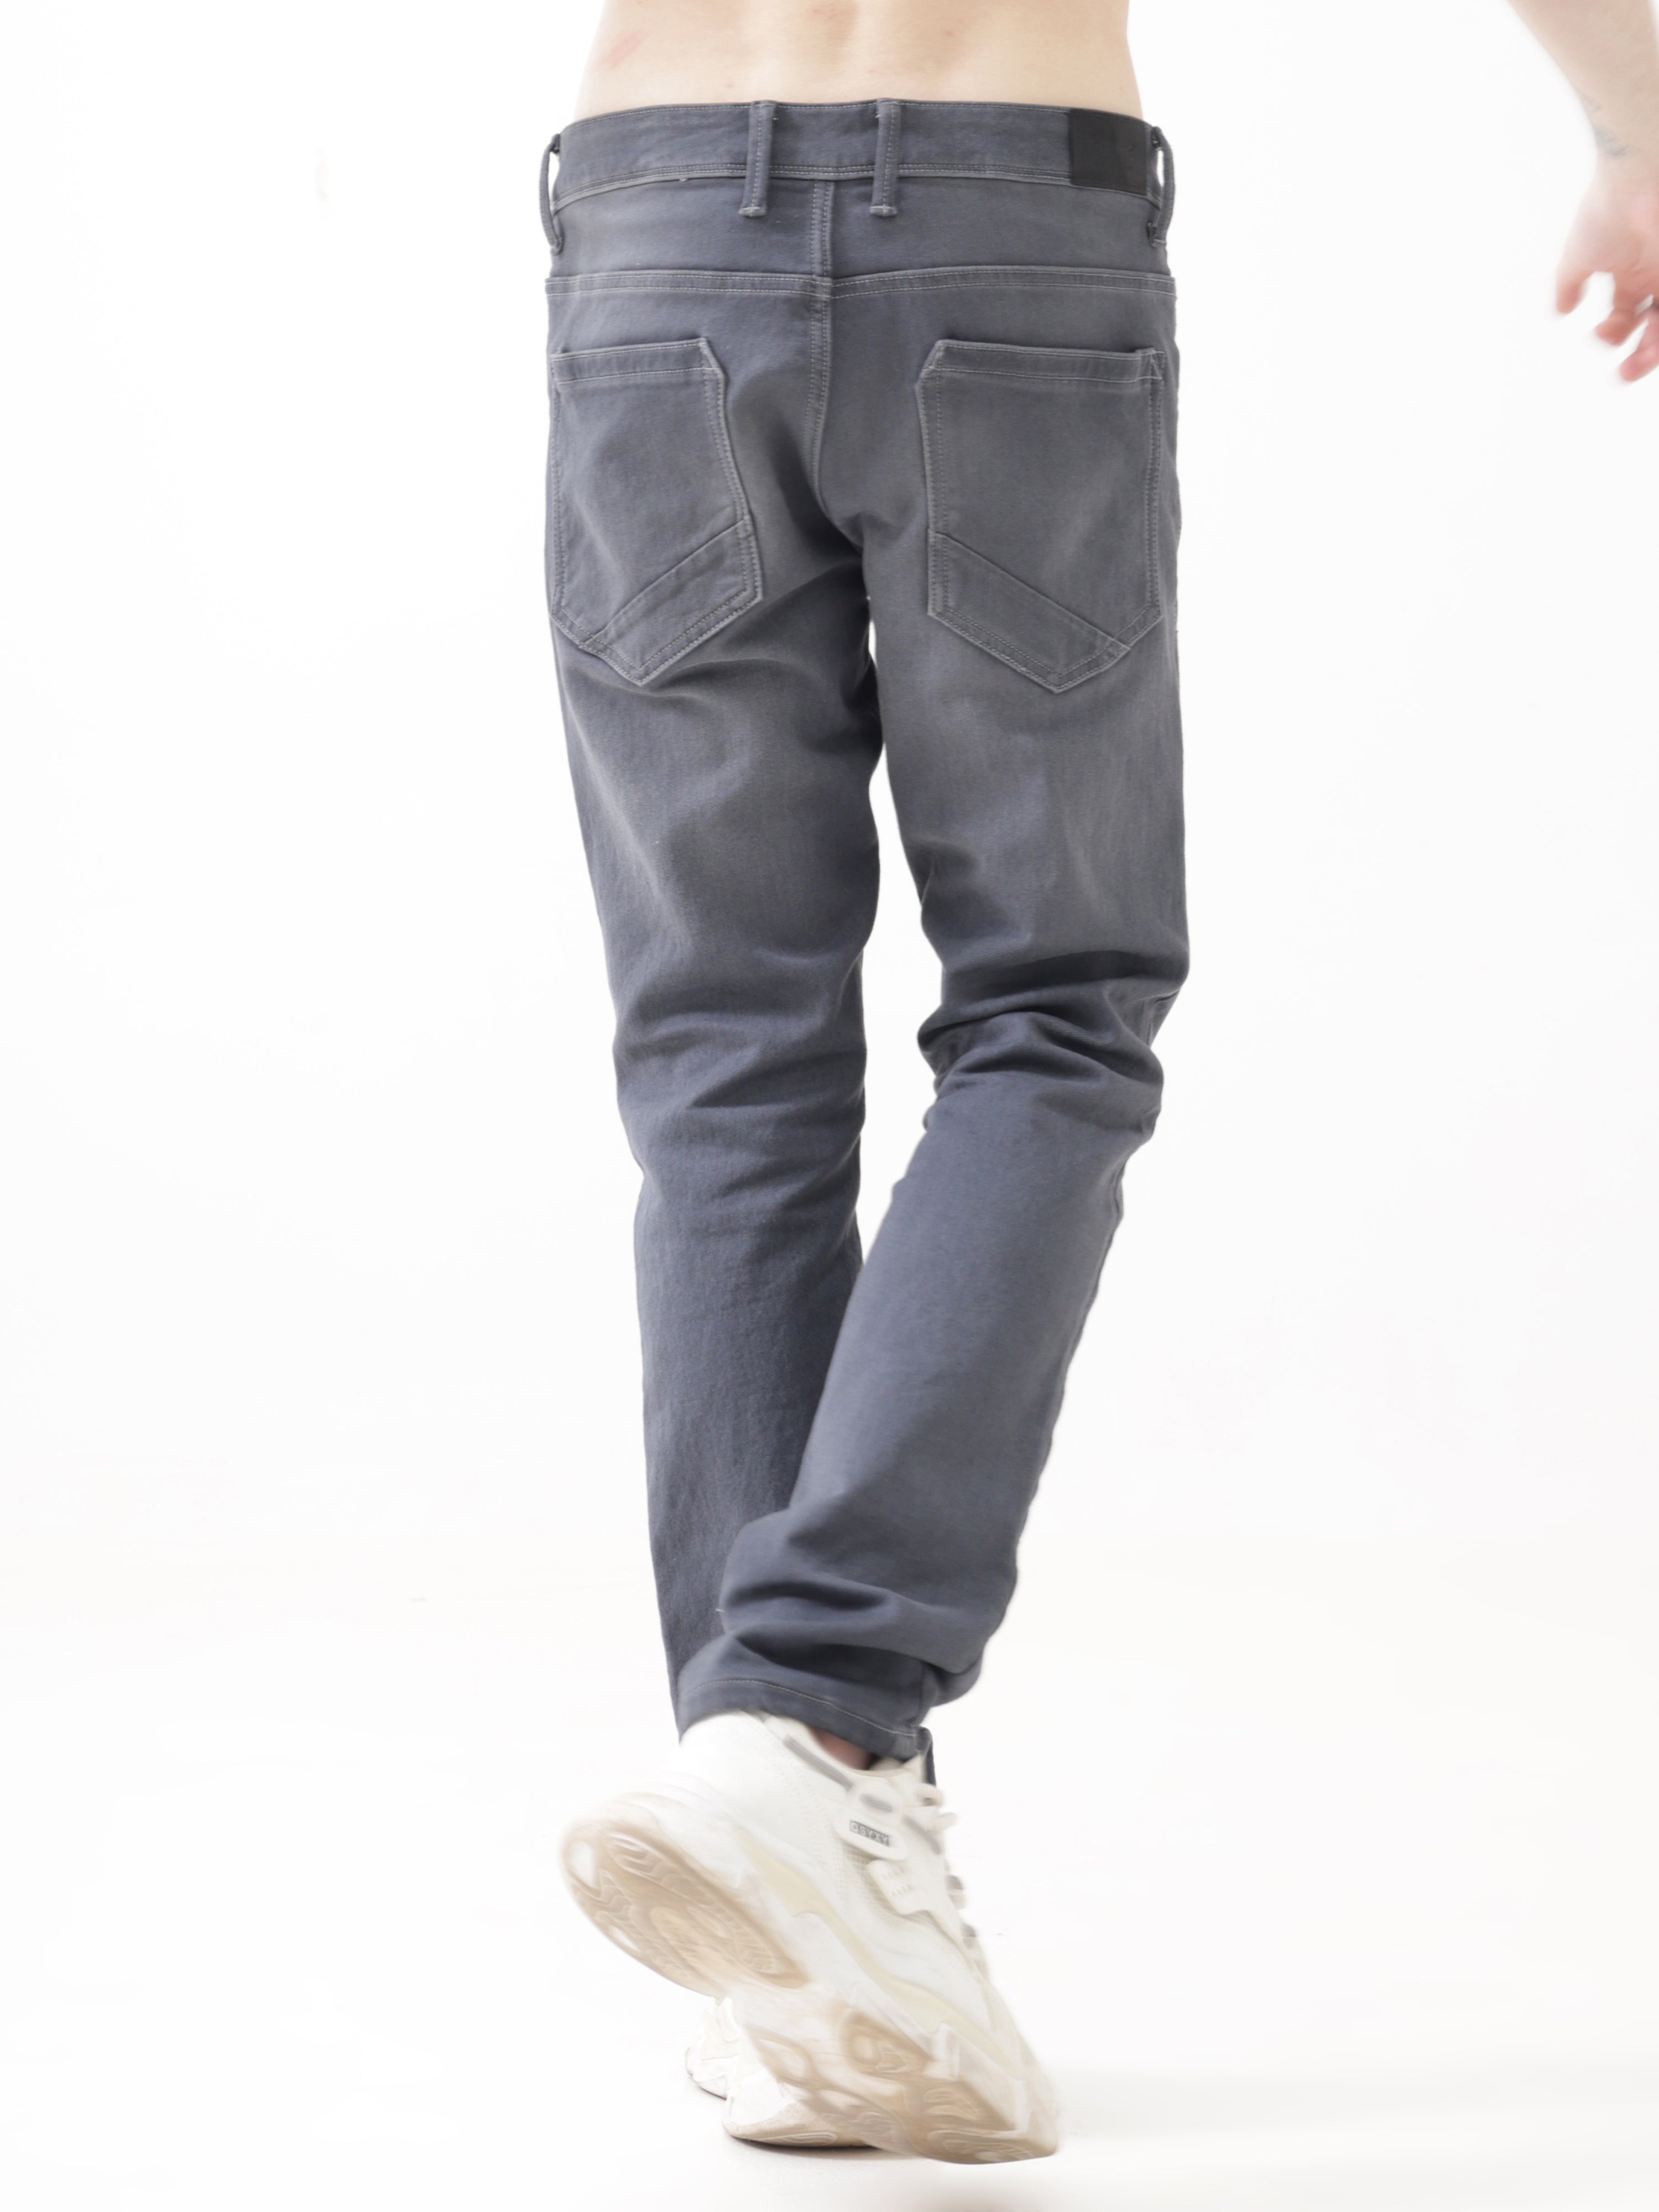 URturms Discover X-plorer 30 days no wash jeans for men by Turms. Anti-stain, anti-odor, tailored fit jeans perfect for everyday and travel wear. Rs. 2999.00